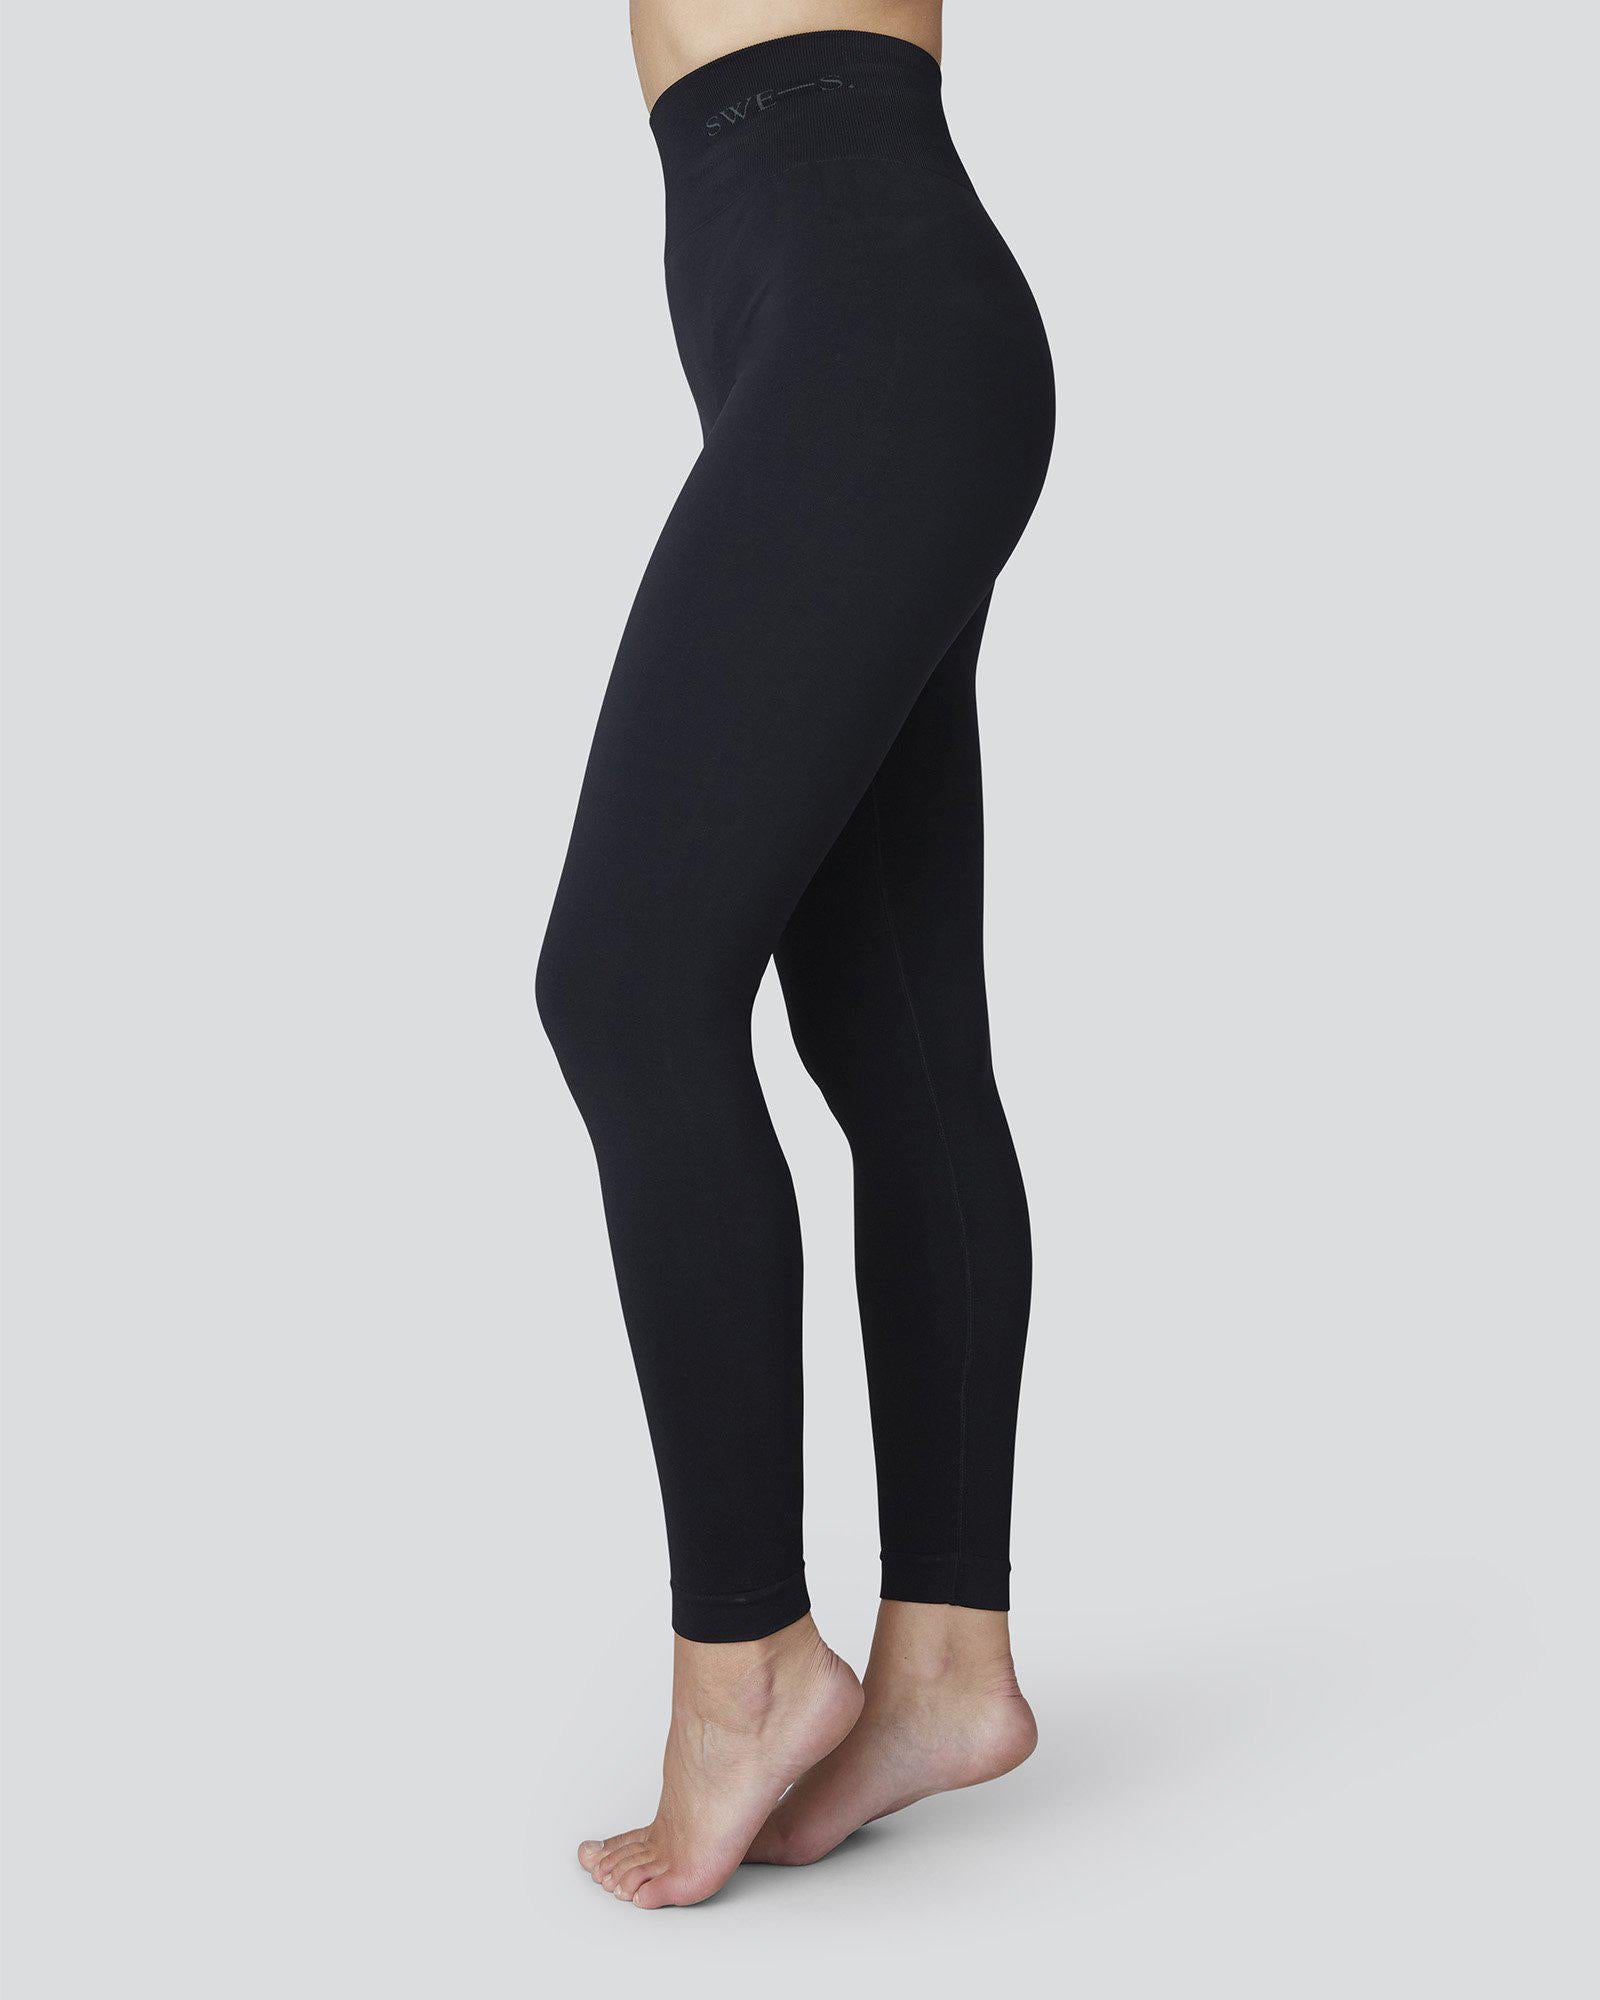 Get 4 Pairs of Top-Rated, Sweat-Wicking Leggings for $39 on Prime